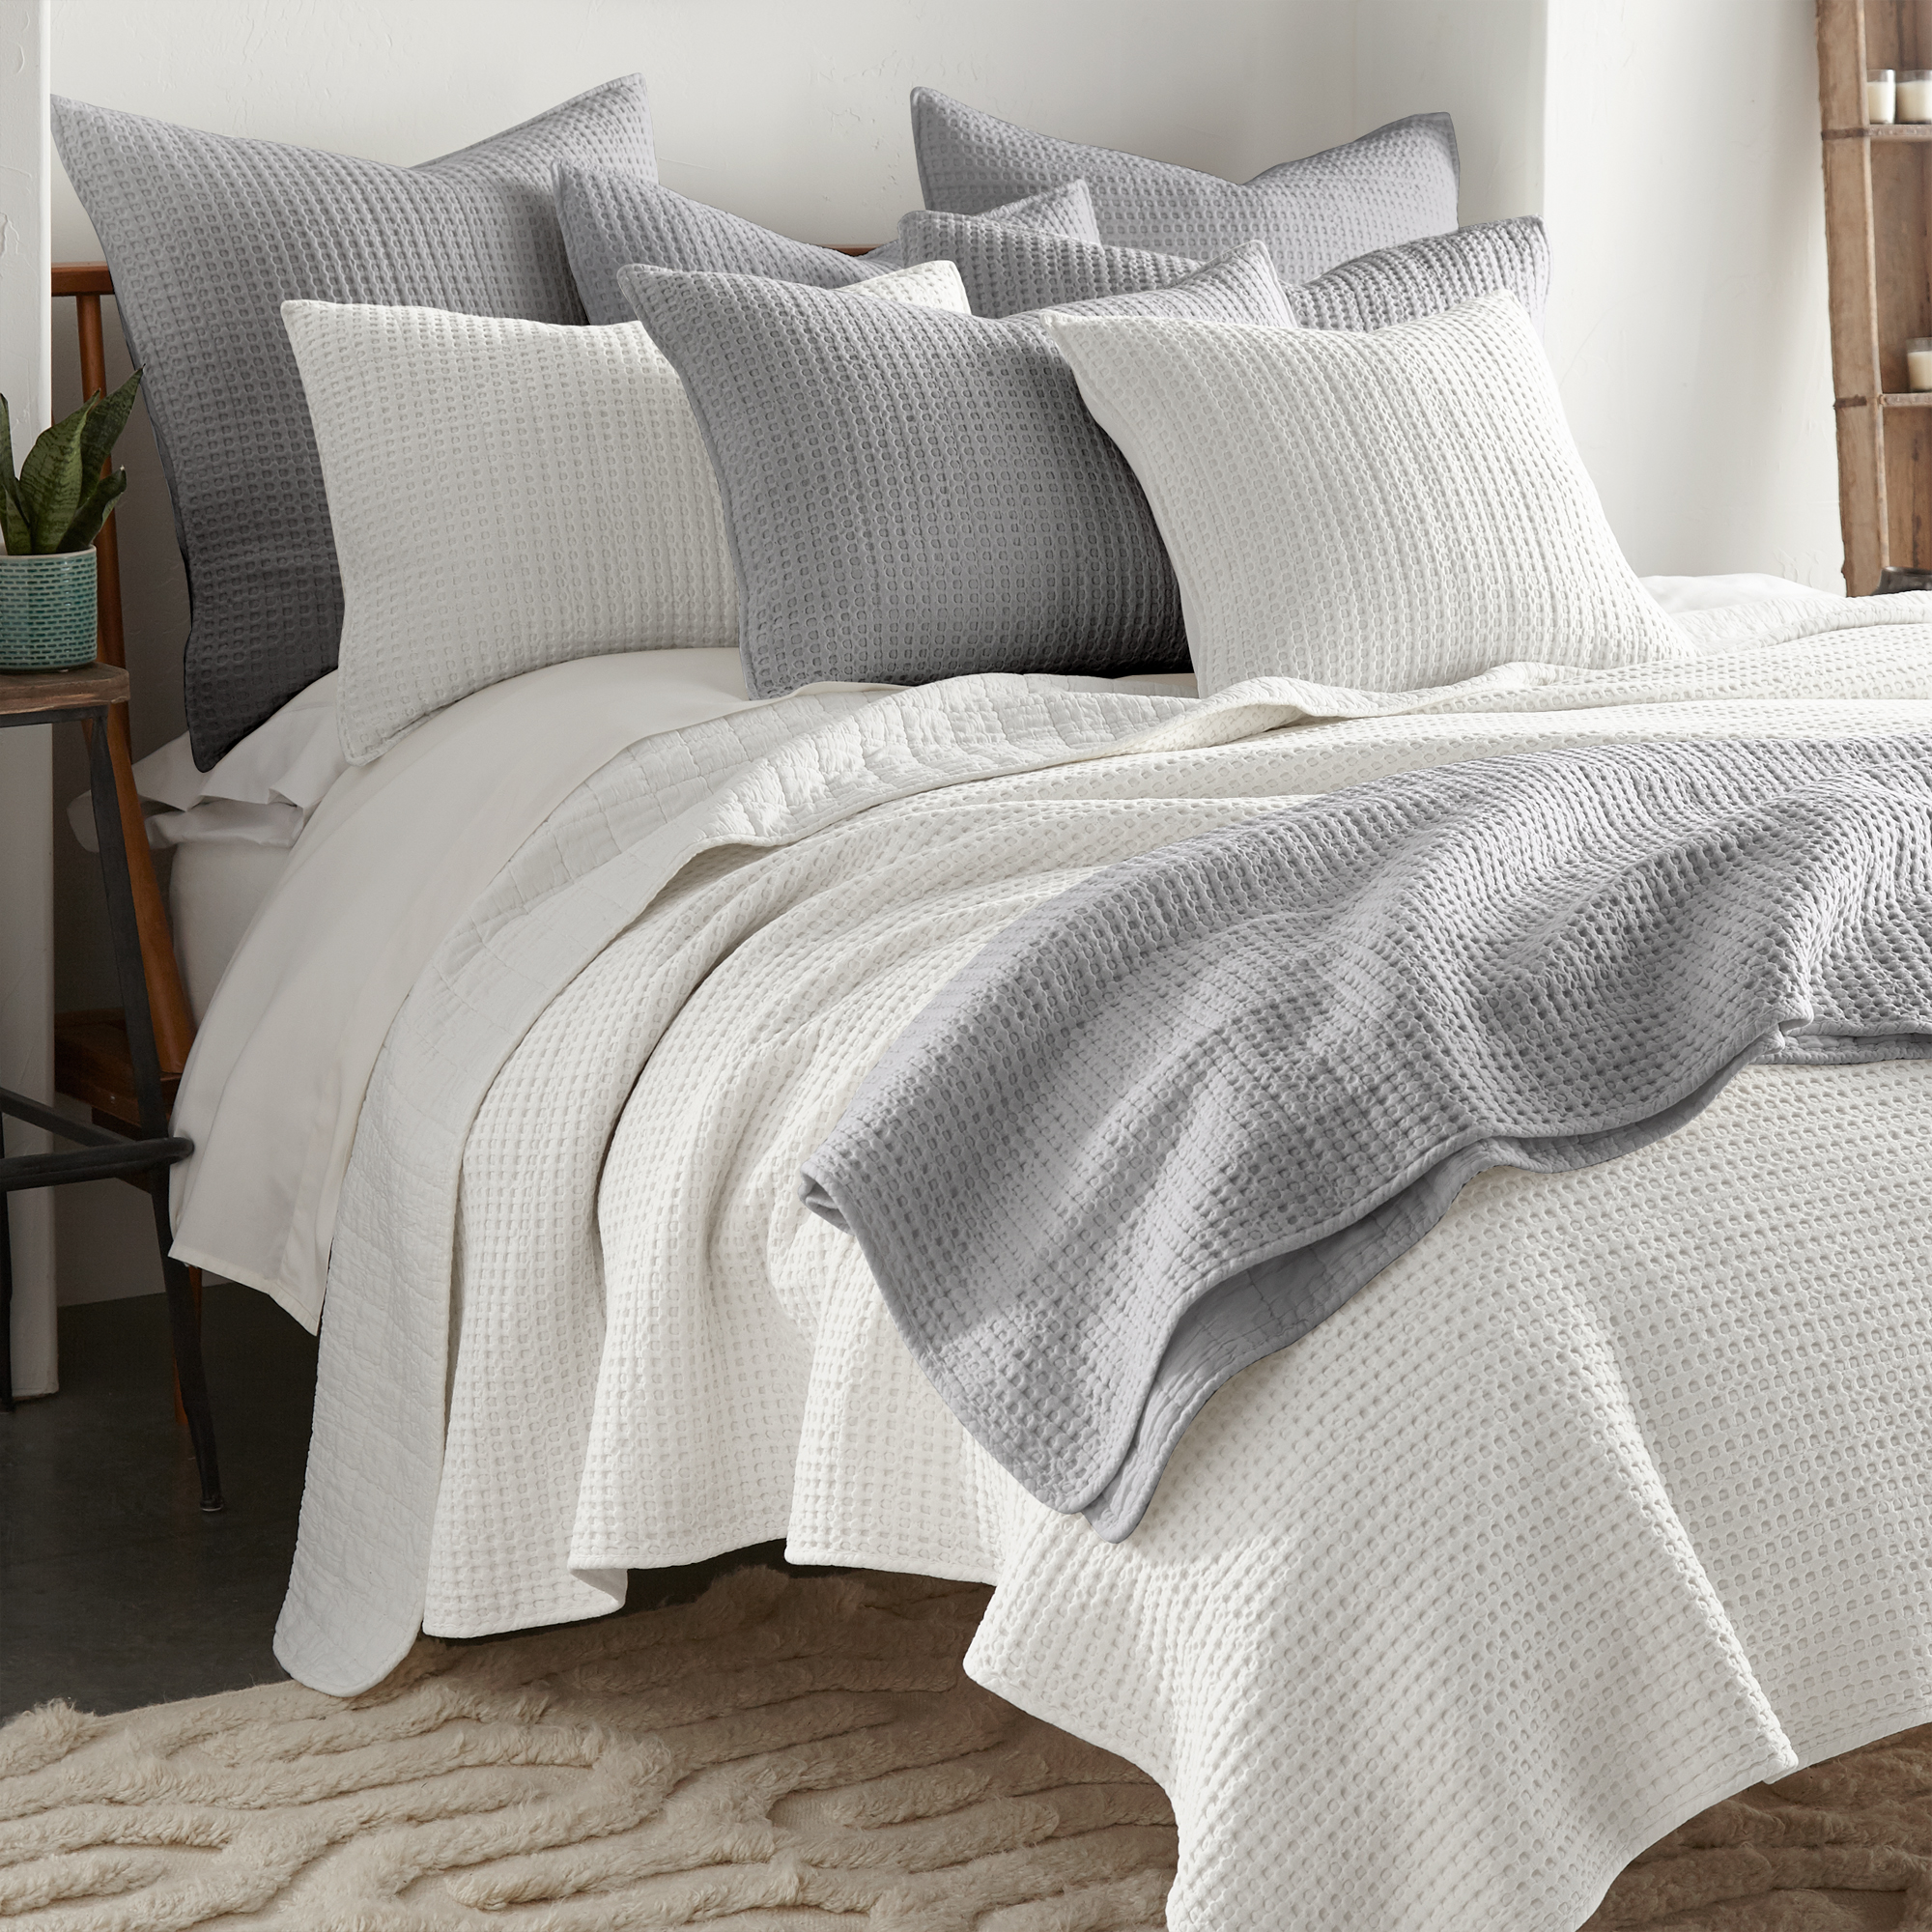 Levtex Home - Mills Waffle - Full/Queen Quilt Set - Cream Cotton Waffle - Quilt Size (88 x 92in.), Sham Size (26 x 20in.) - image 4 of 7